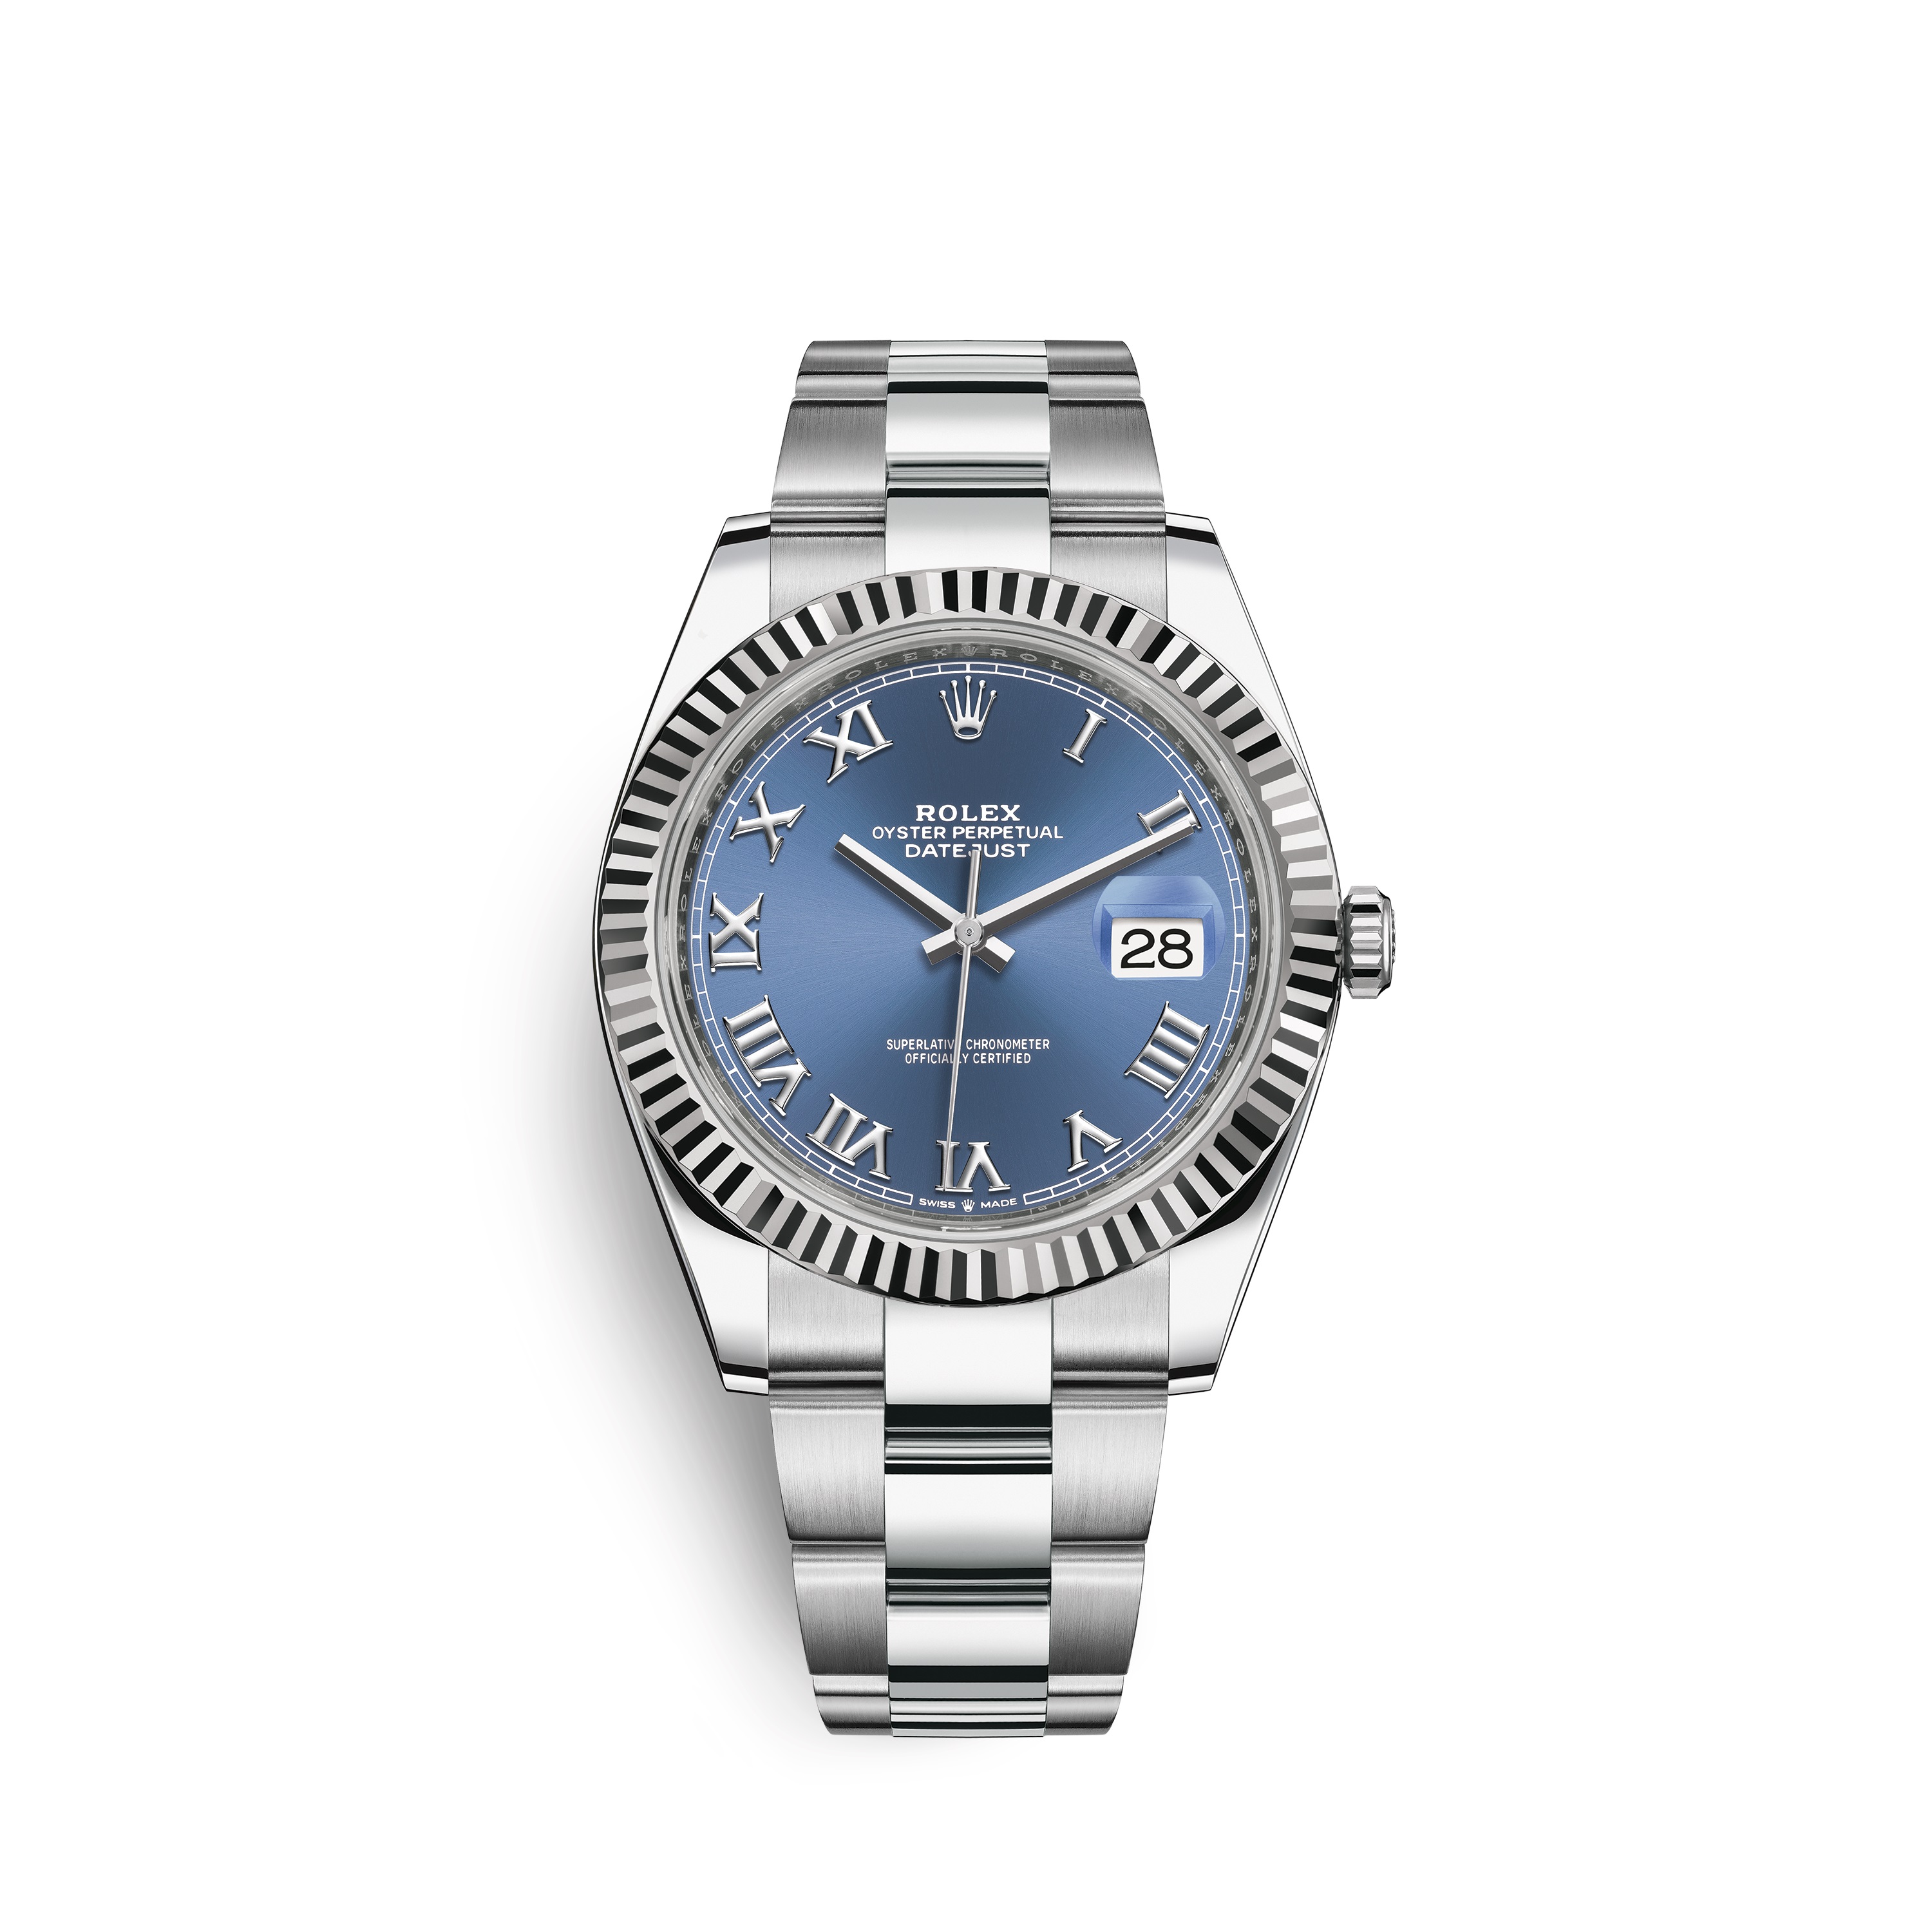 Datejust 41 126334 White Gold and Stainless Steel Watch (Blue)